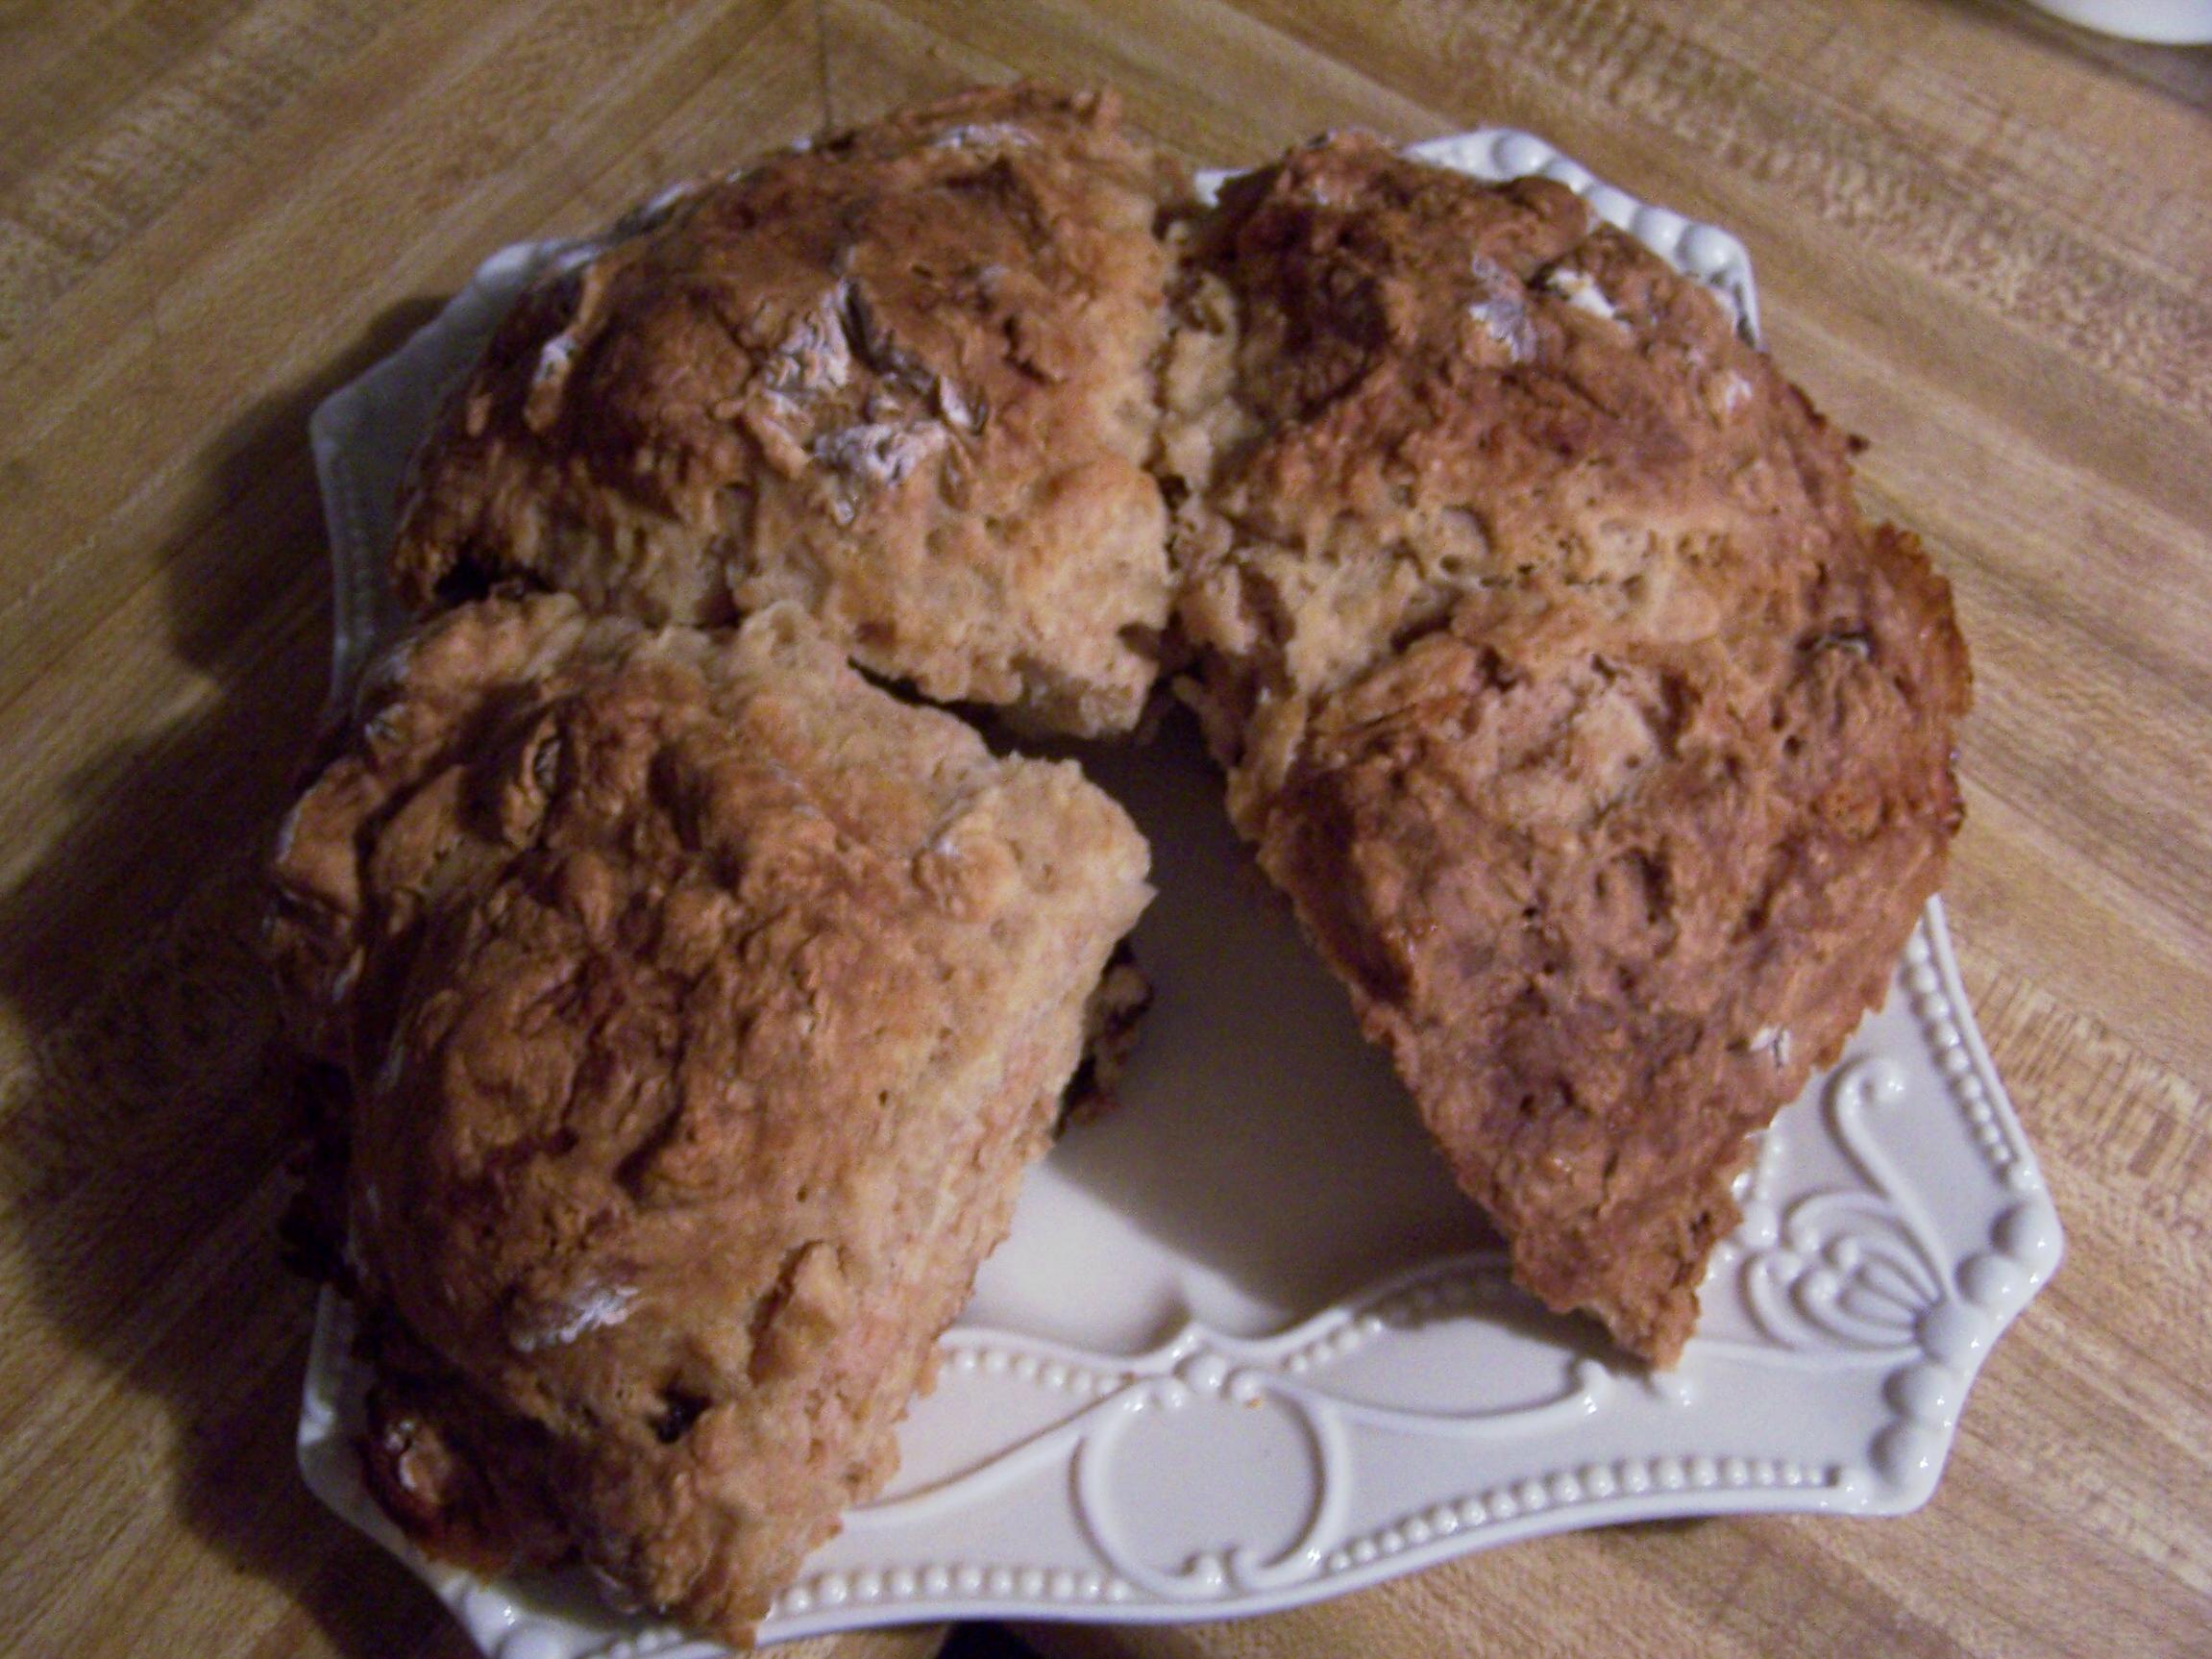  Sliced Irish Applesauce Soda Bread filled with chunks of apples that will make your taste buds dance.